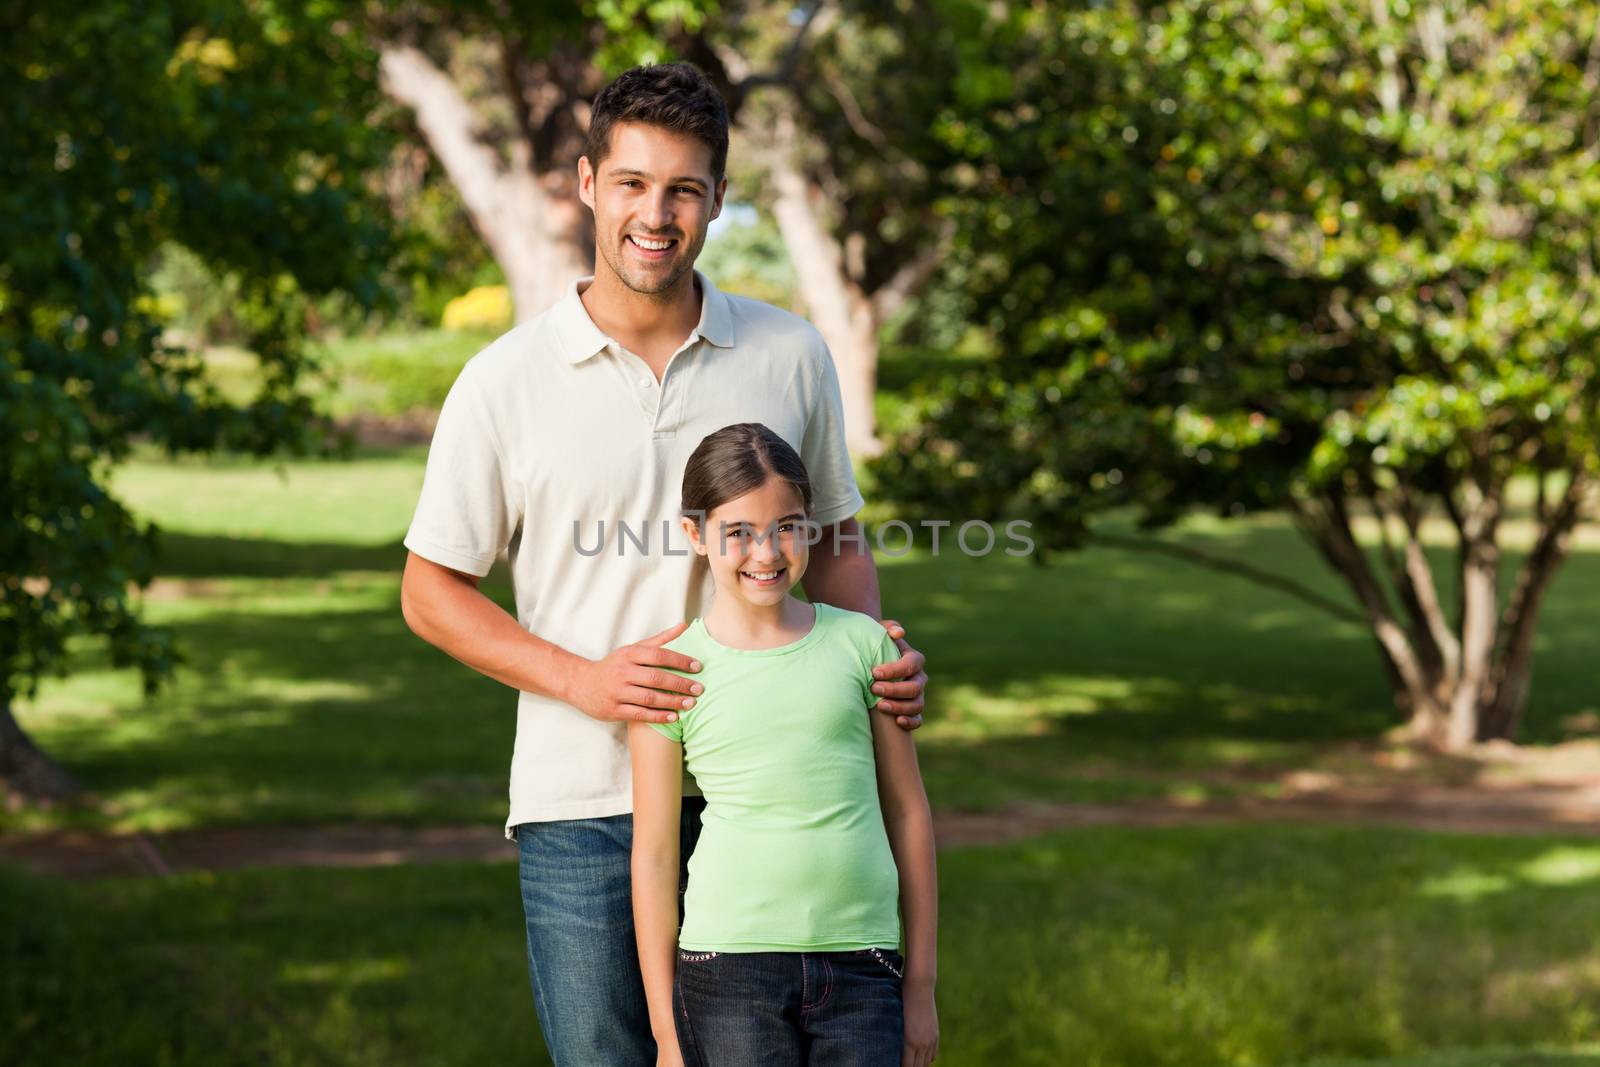 Daughter with her father in the park during the summer